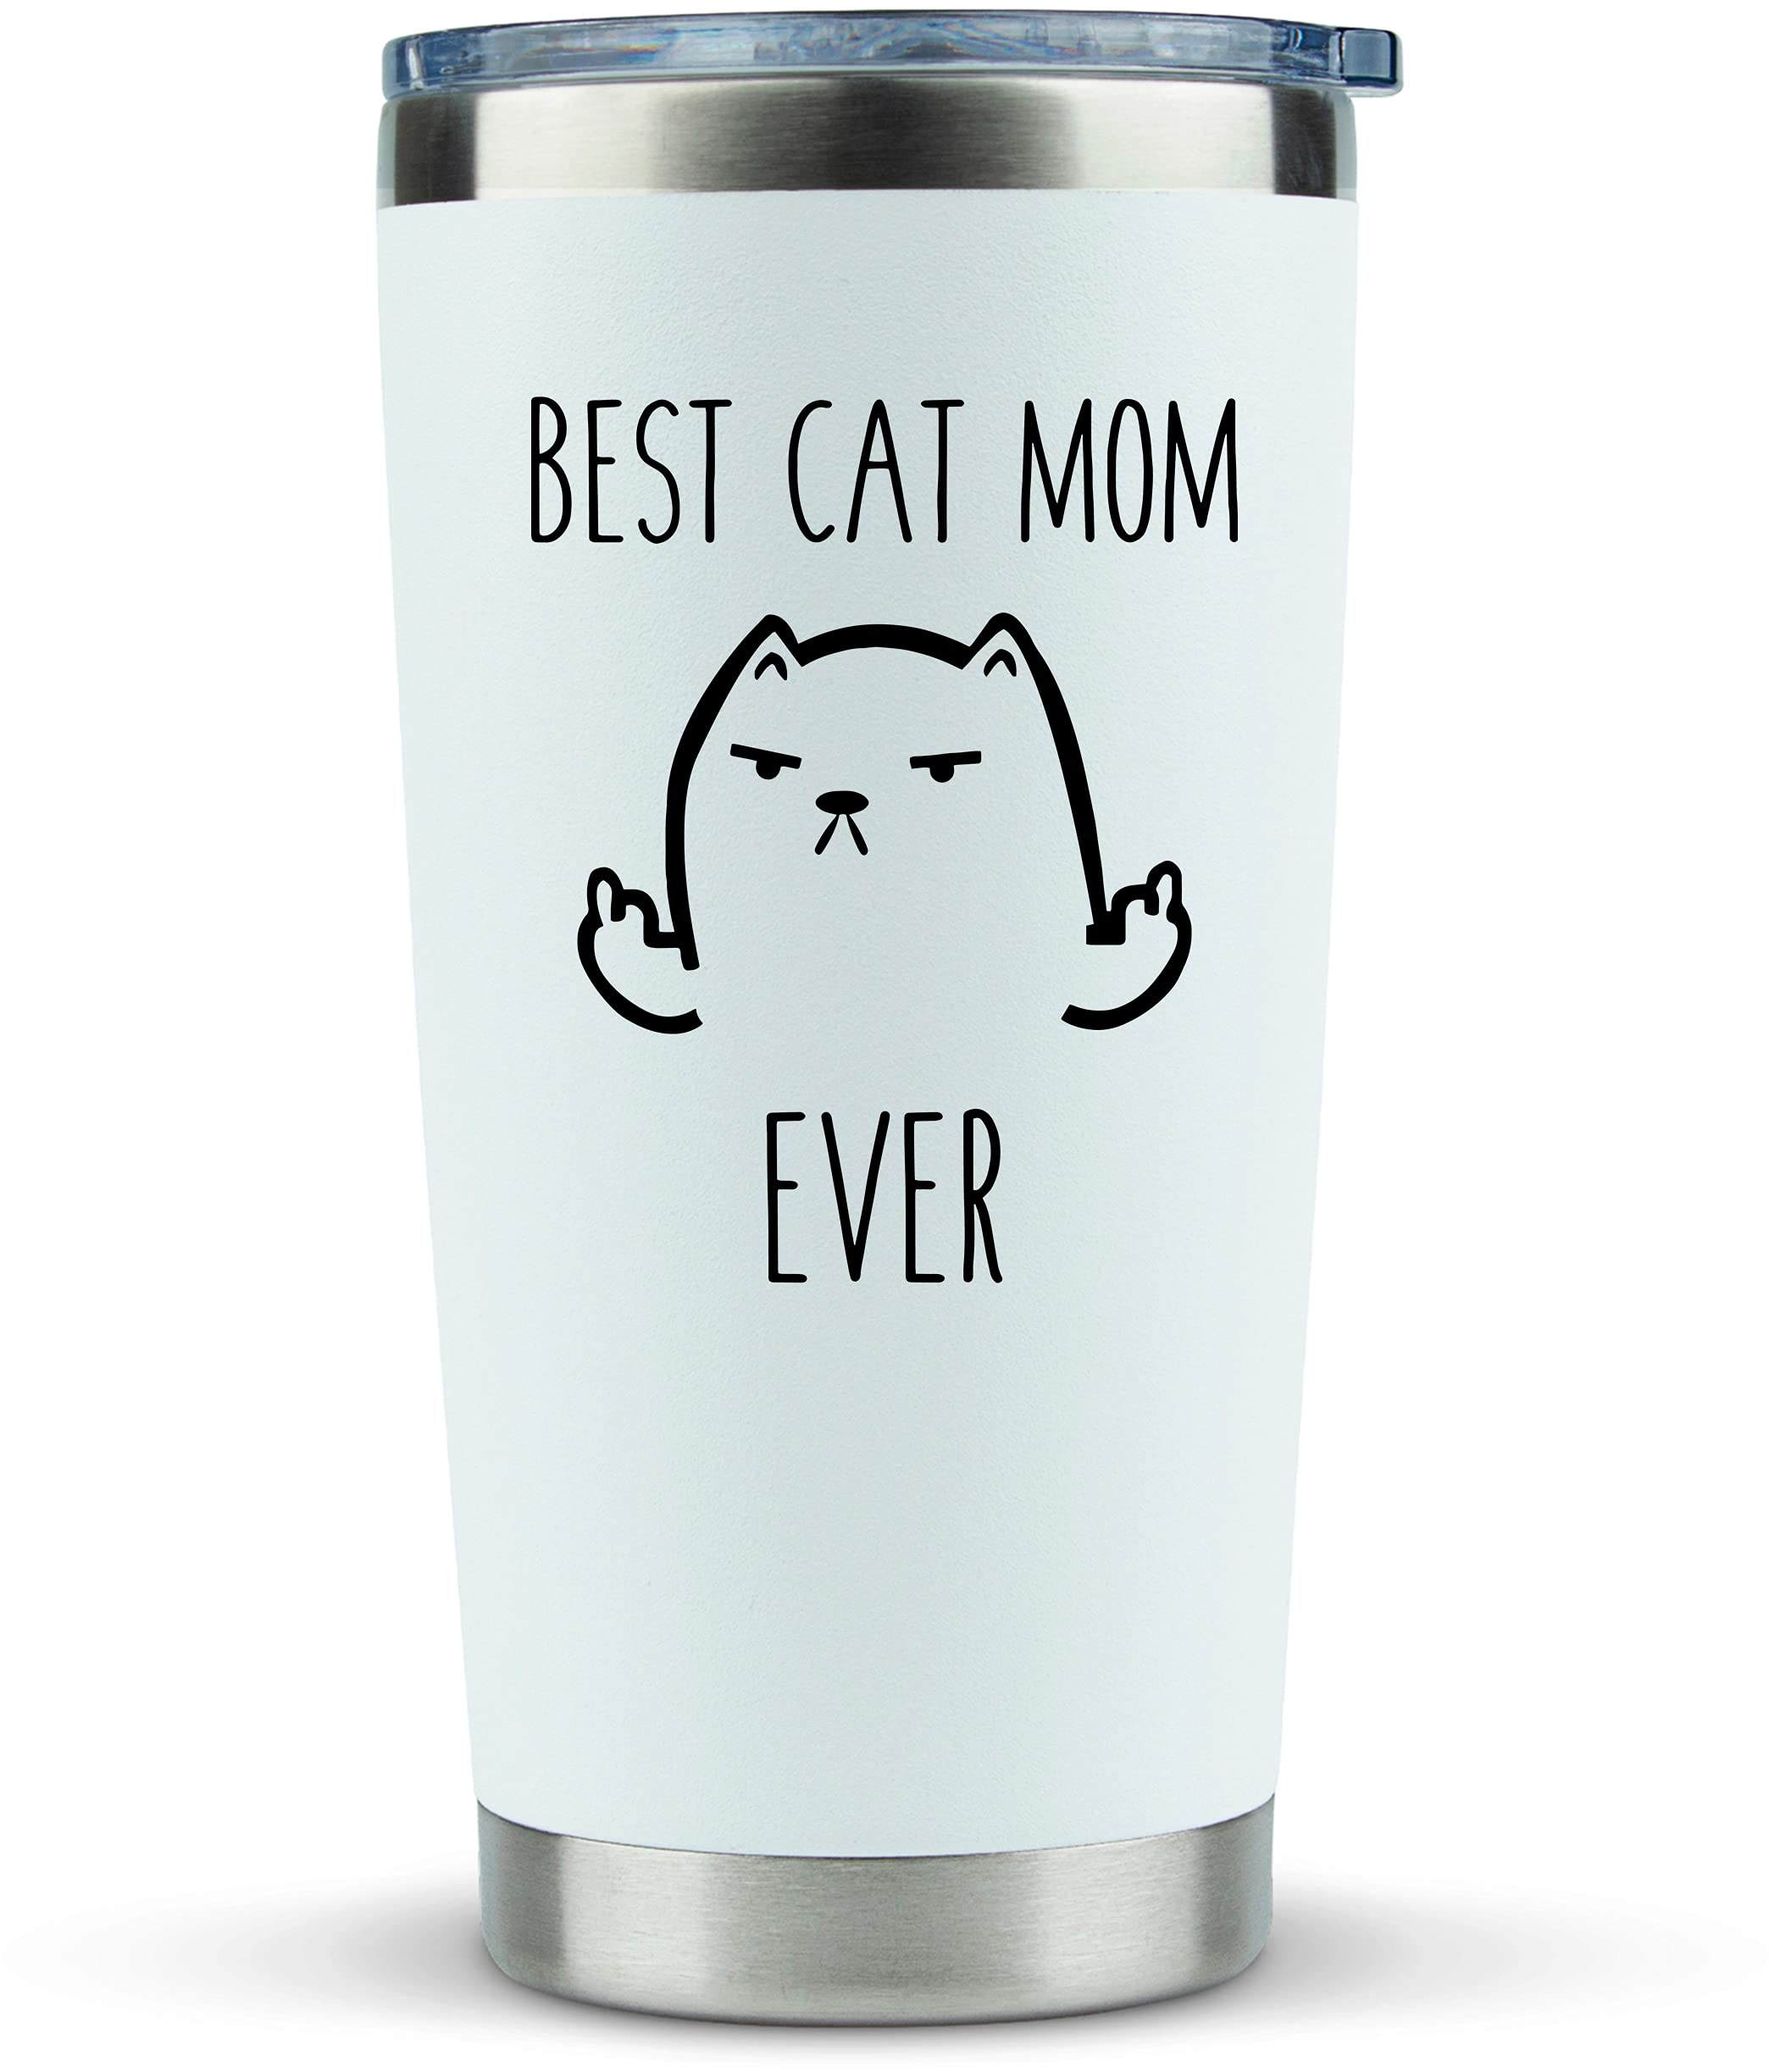 KLUBI Cat Mom Gifts for Women - Travel Mugs/Tumbler - 20oz Mug for Coffee/Tea-Funny Gifts for Cat Themed Things, Lovers, Crazy Cat Lady Gift